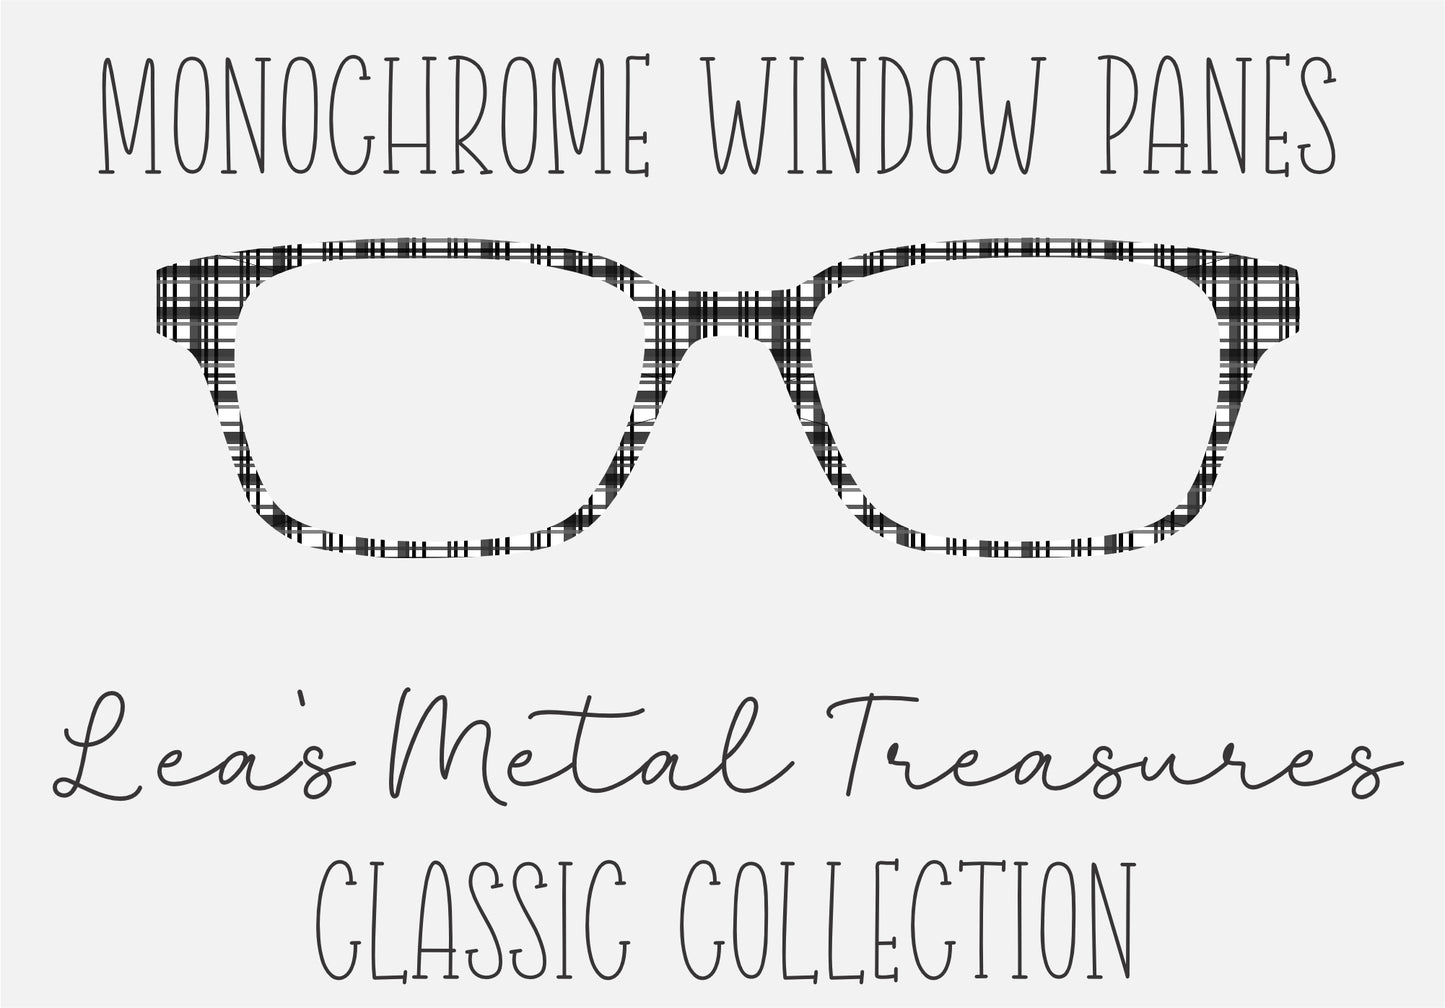 MONOCHROME WINDOW PANES Eyewear Frame Toppers COMES WITH MAGNETS